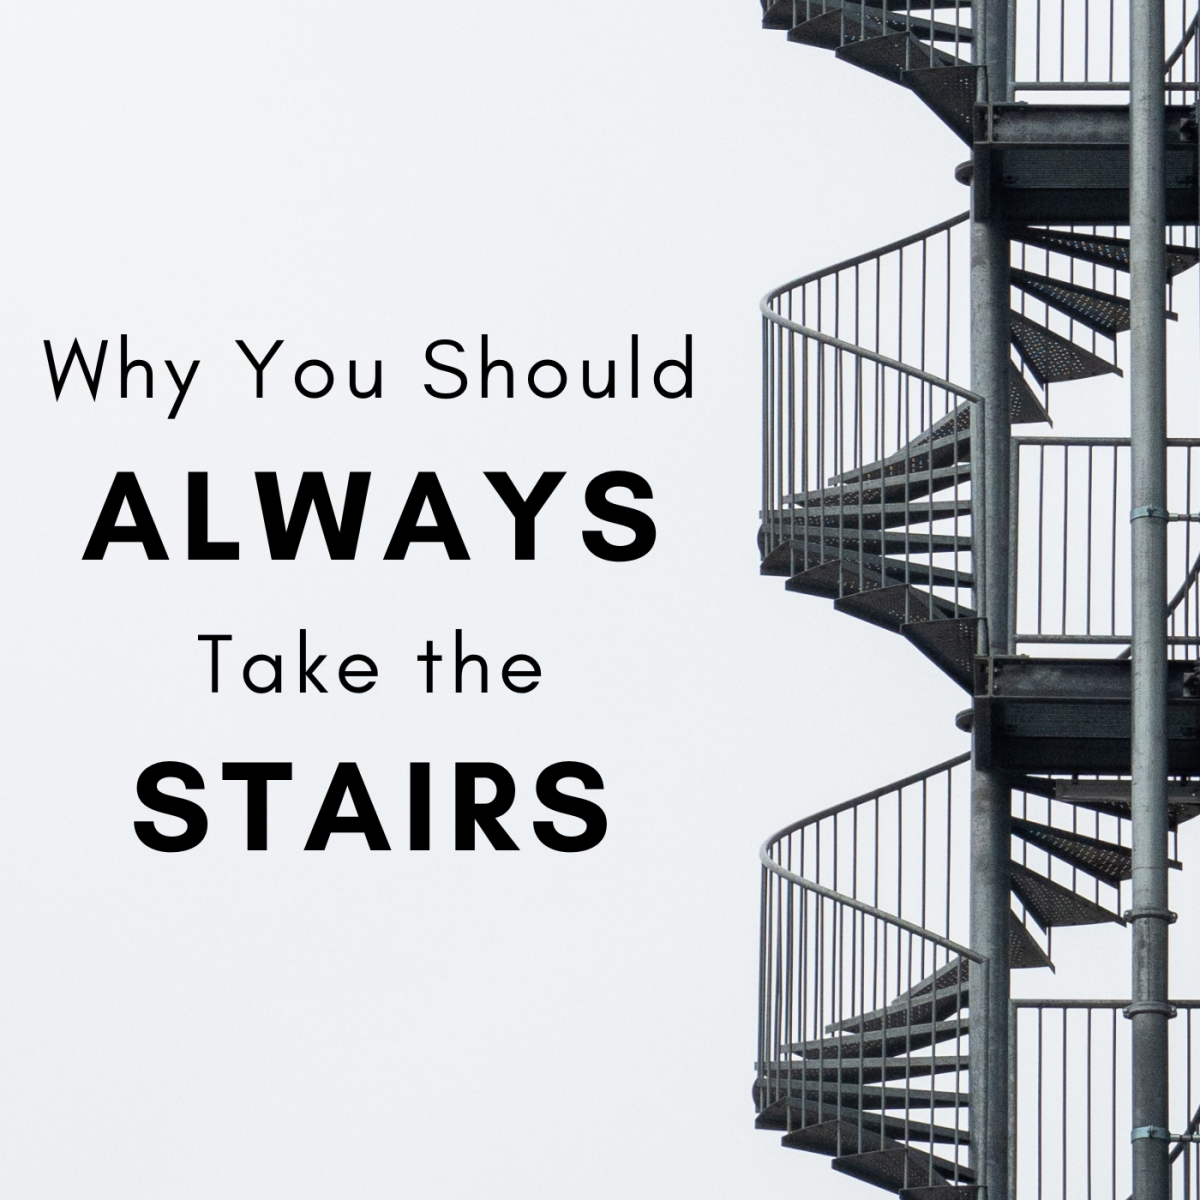 What Are the Upsides of Choosing Staircase Climbing Over Elevator Traveling?